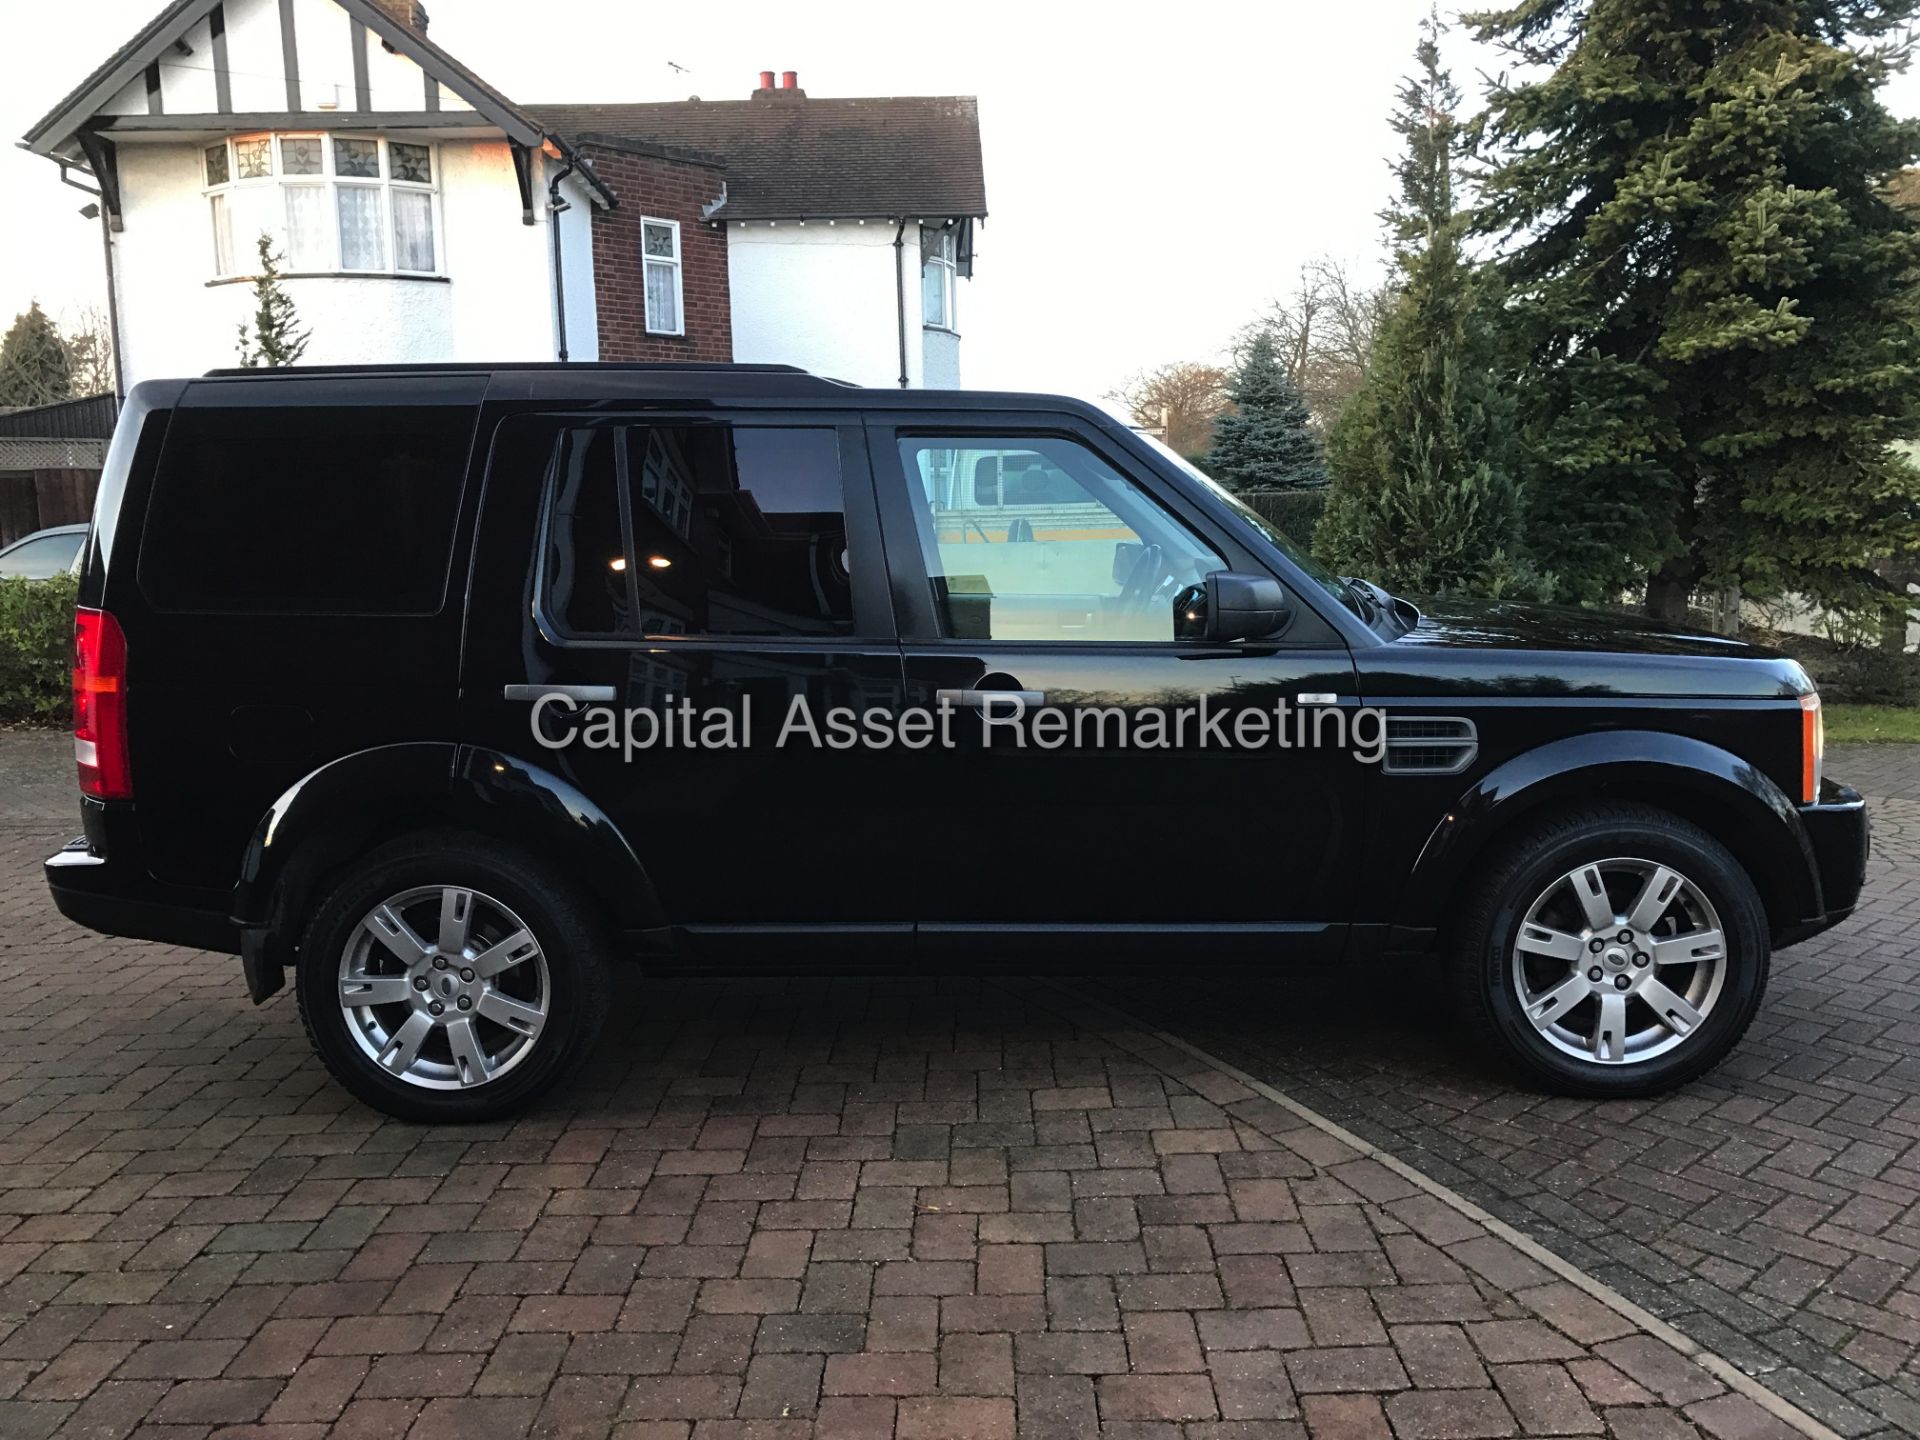 LANDROVER DISCOVERY 3 "TDV6" AUTO - (BLACK EDITION) - 09 REG - SAT NAV - LEATHER - 7 SEATER - WOW!! - Image 4 of 30